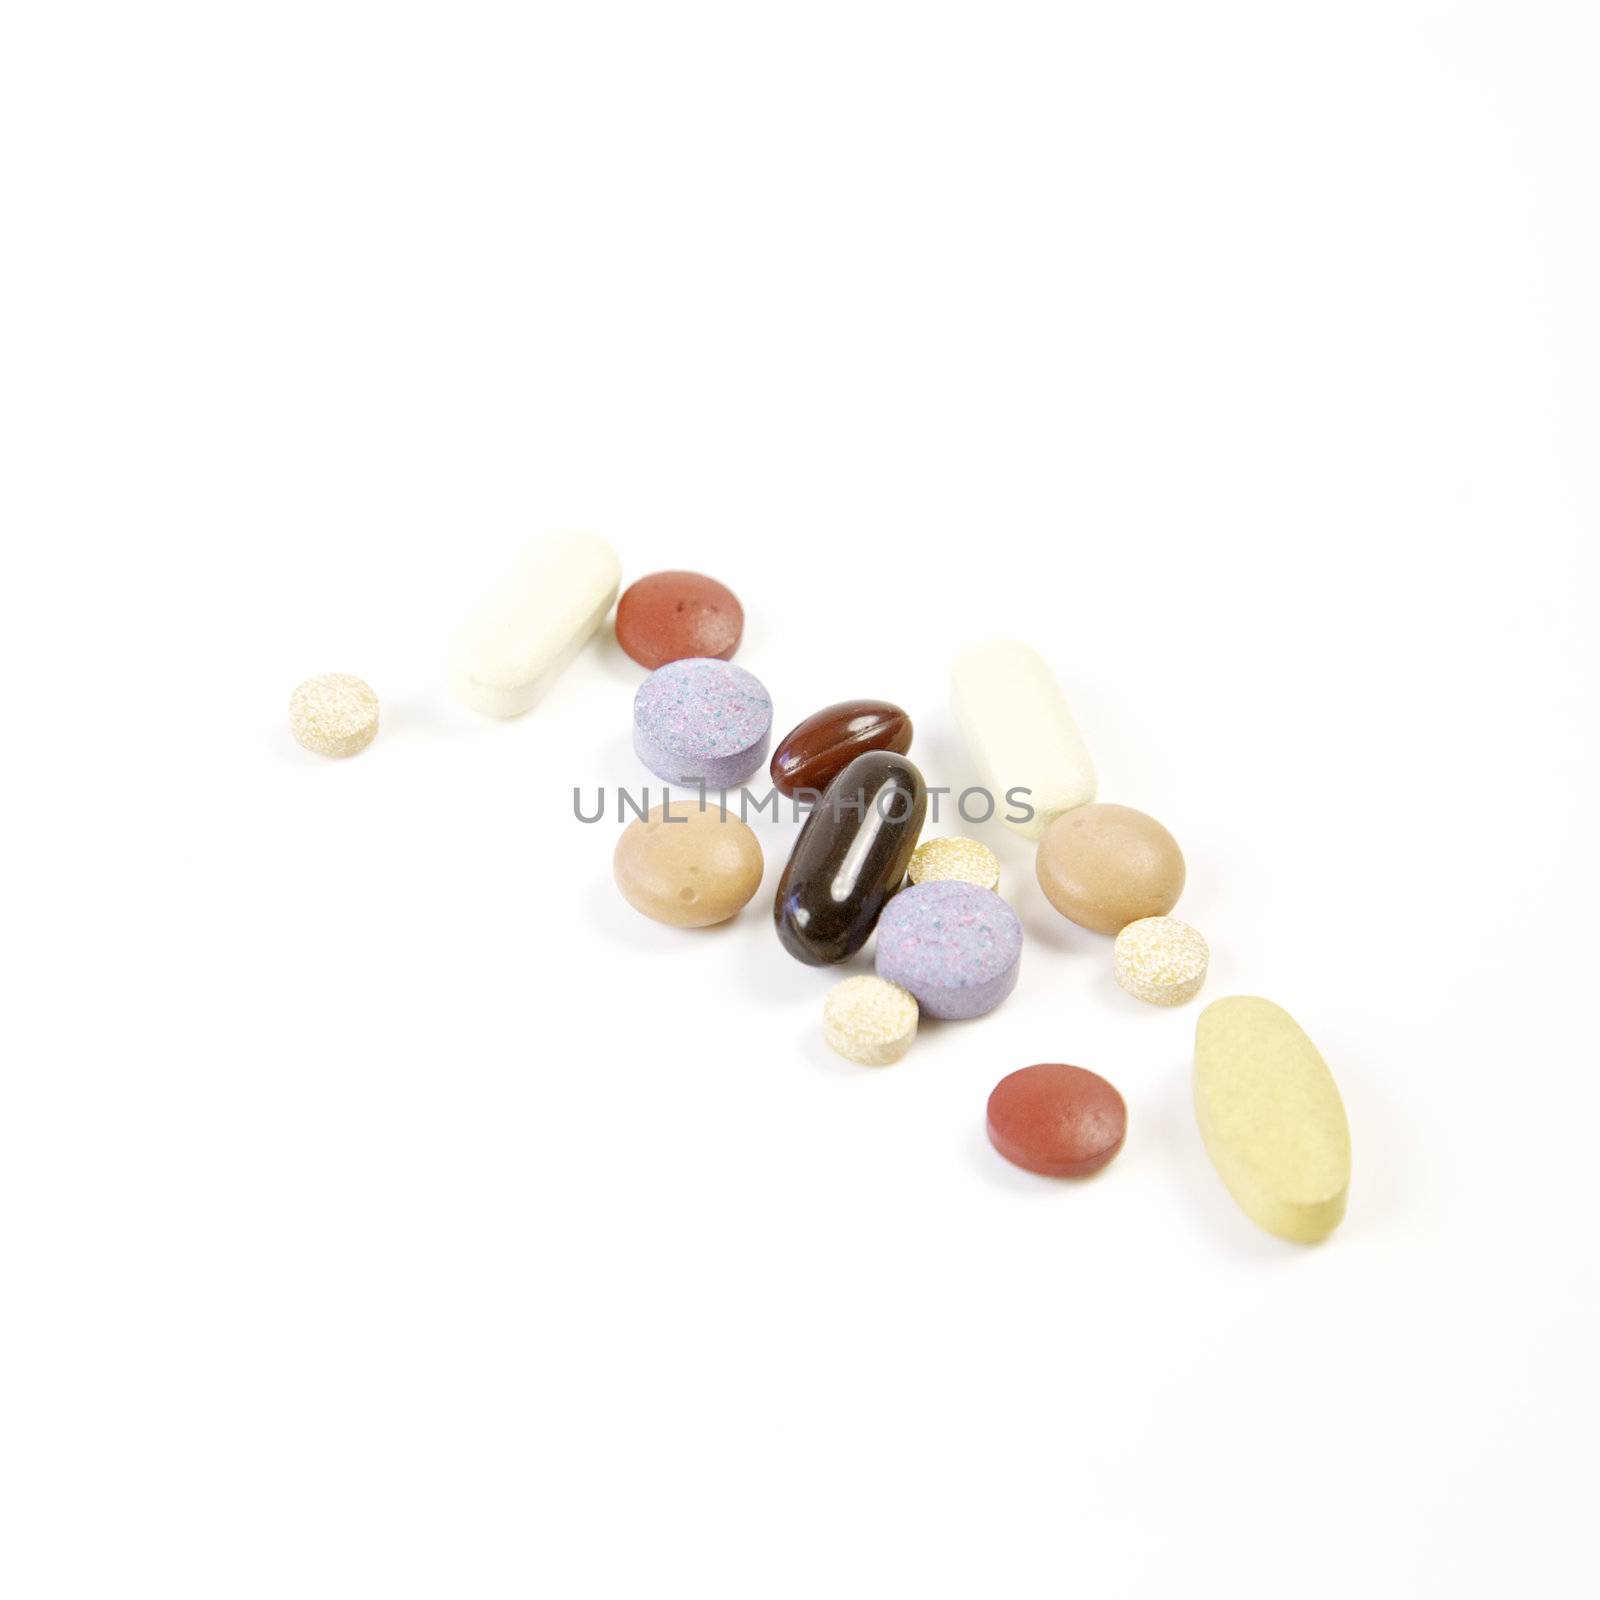 Pills and capsules on a white background